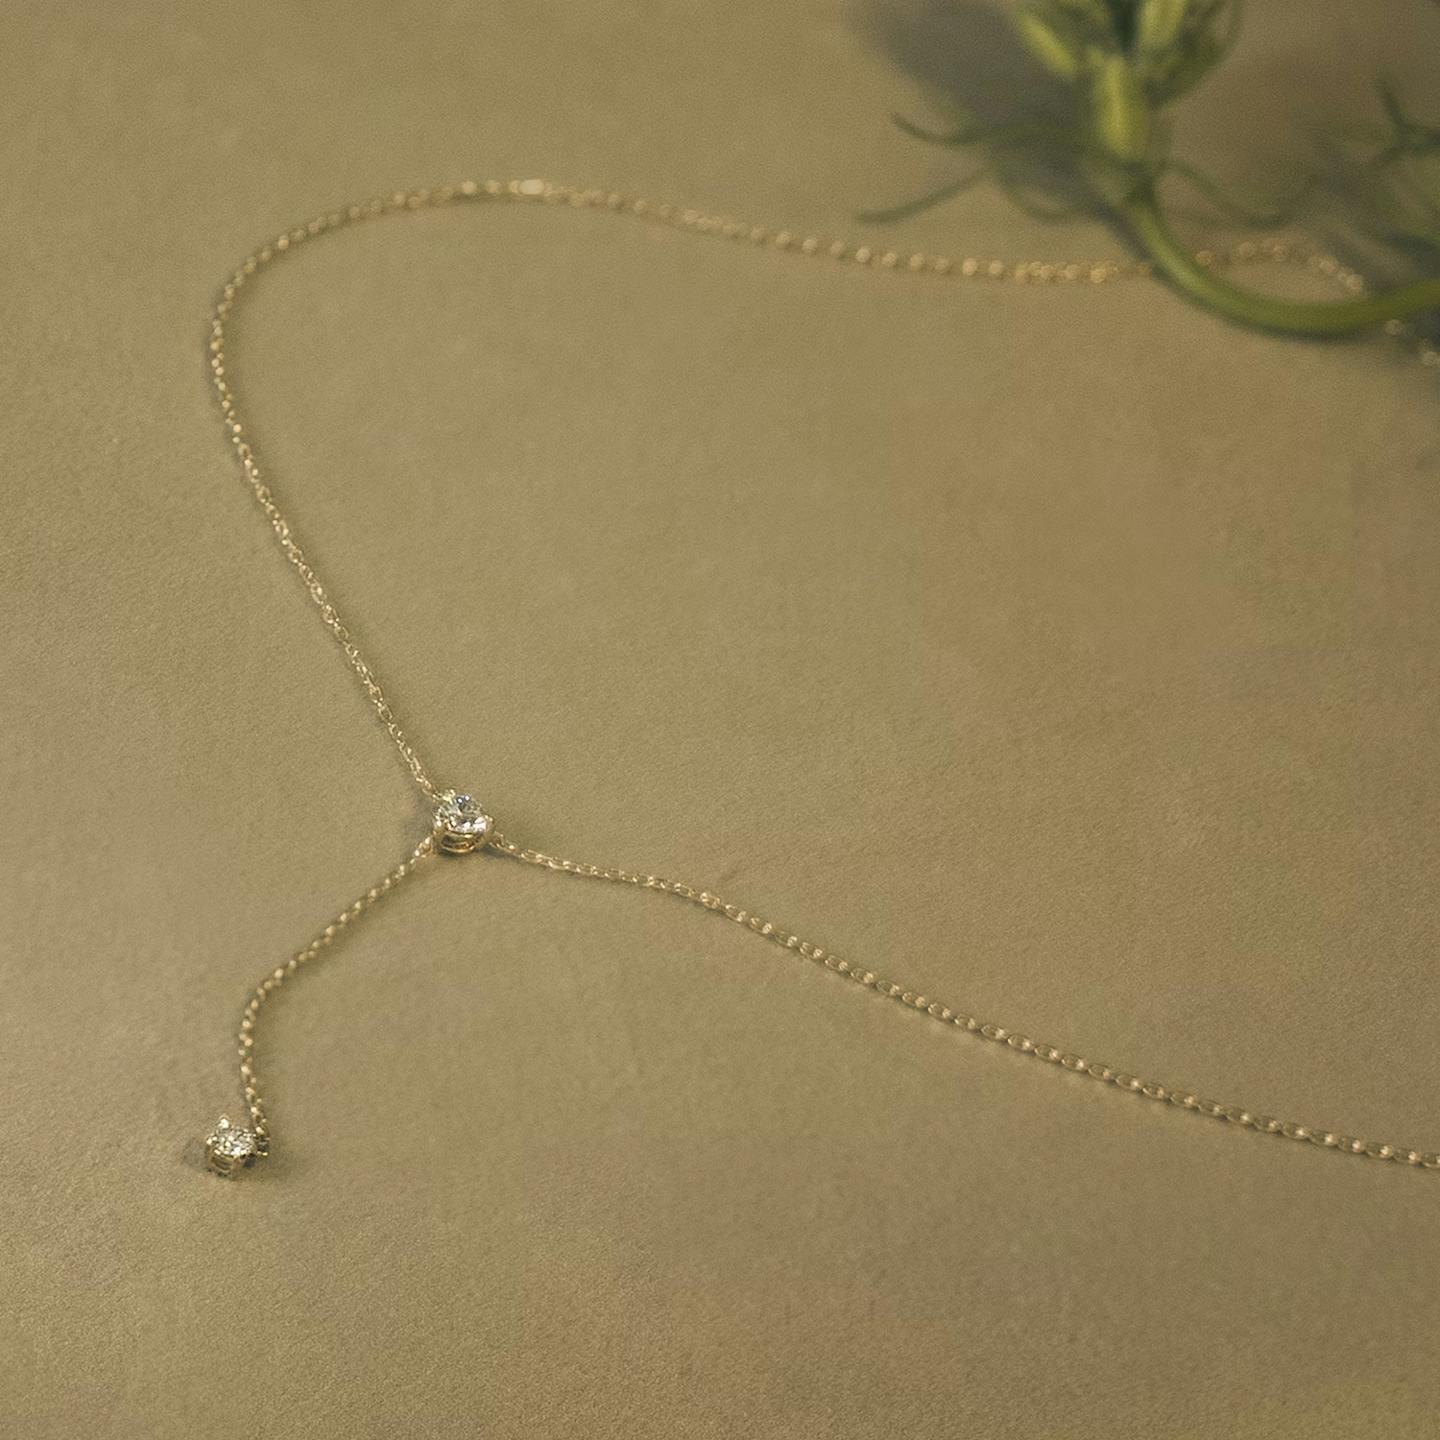 Duo Lariat Necklace | Round Brilliant | 14k | 18k Yellow Gold | Chain length: 16-18